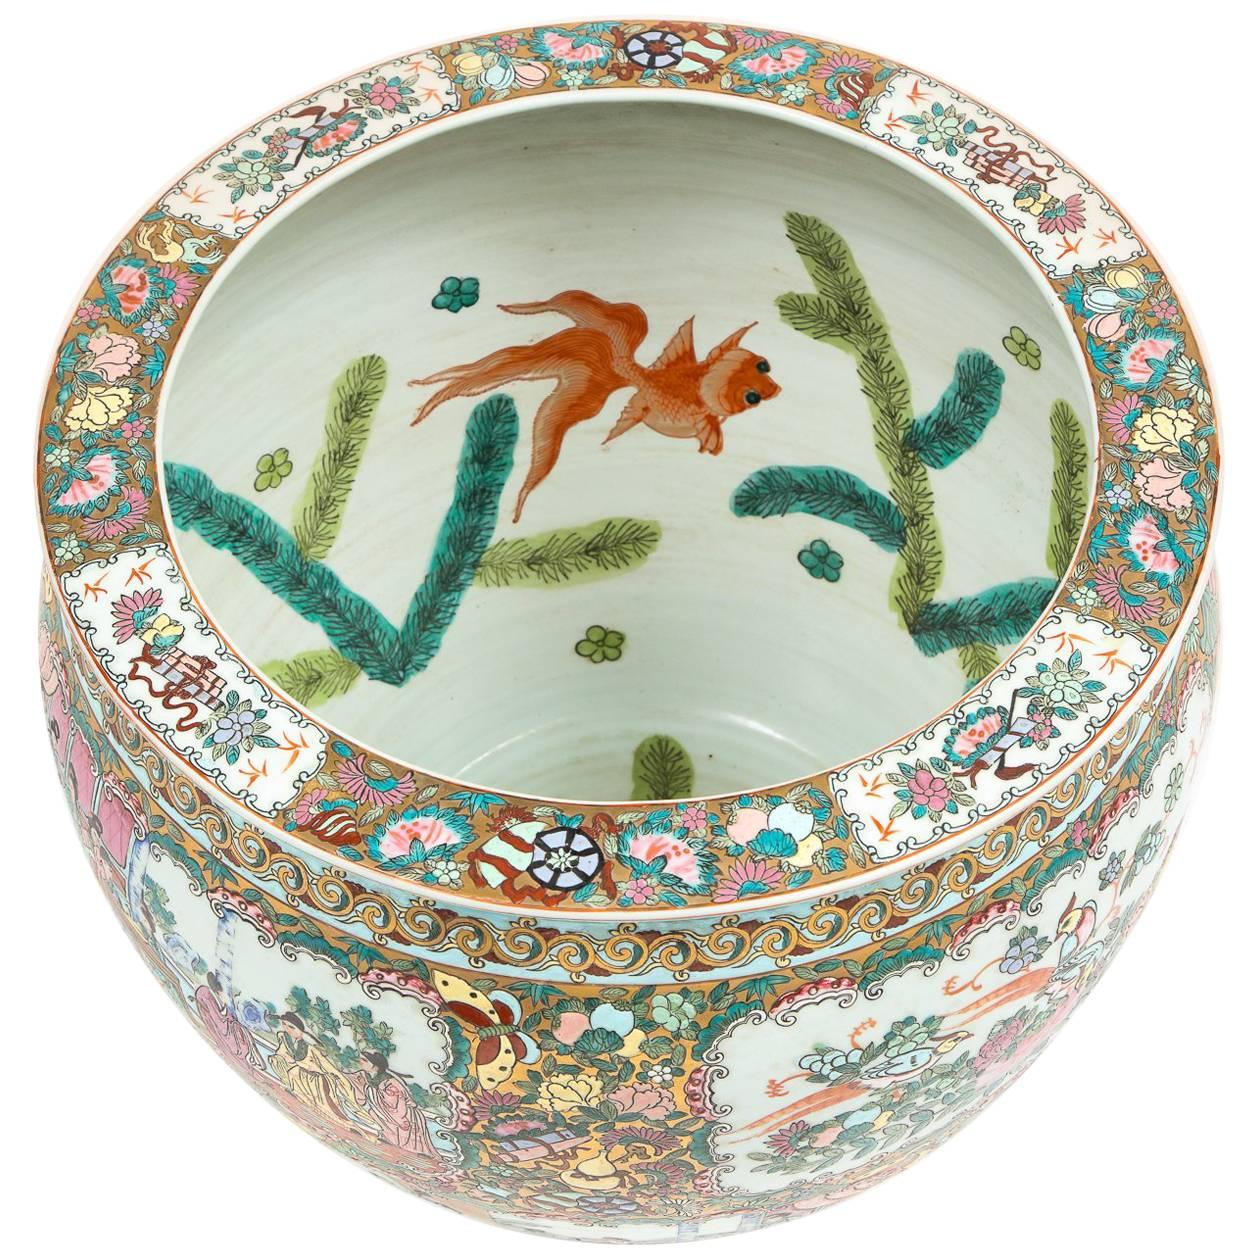 Oversized Chinoiserie Planter with Koi Fish Interior Motif For Sale